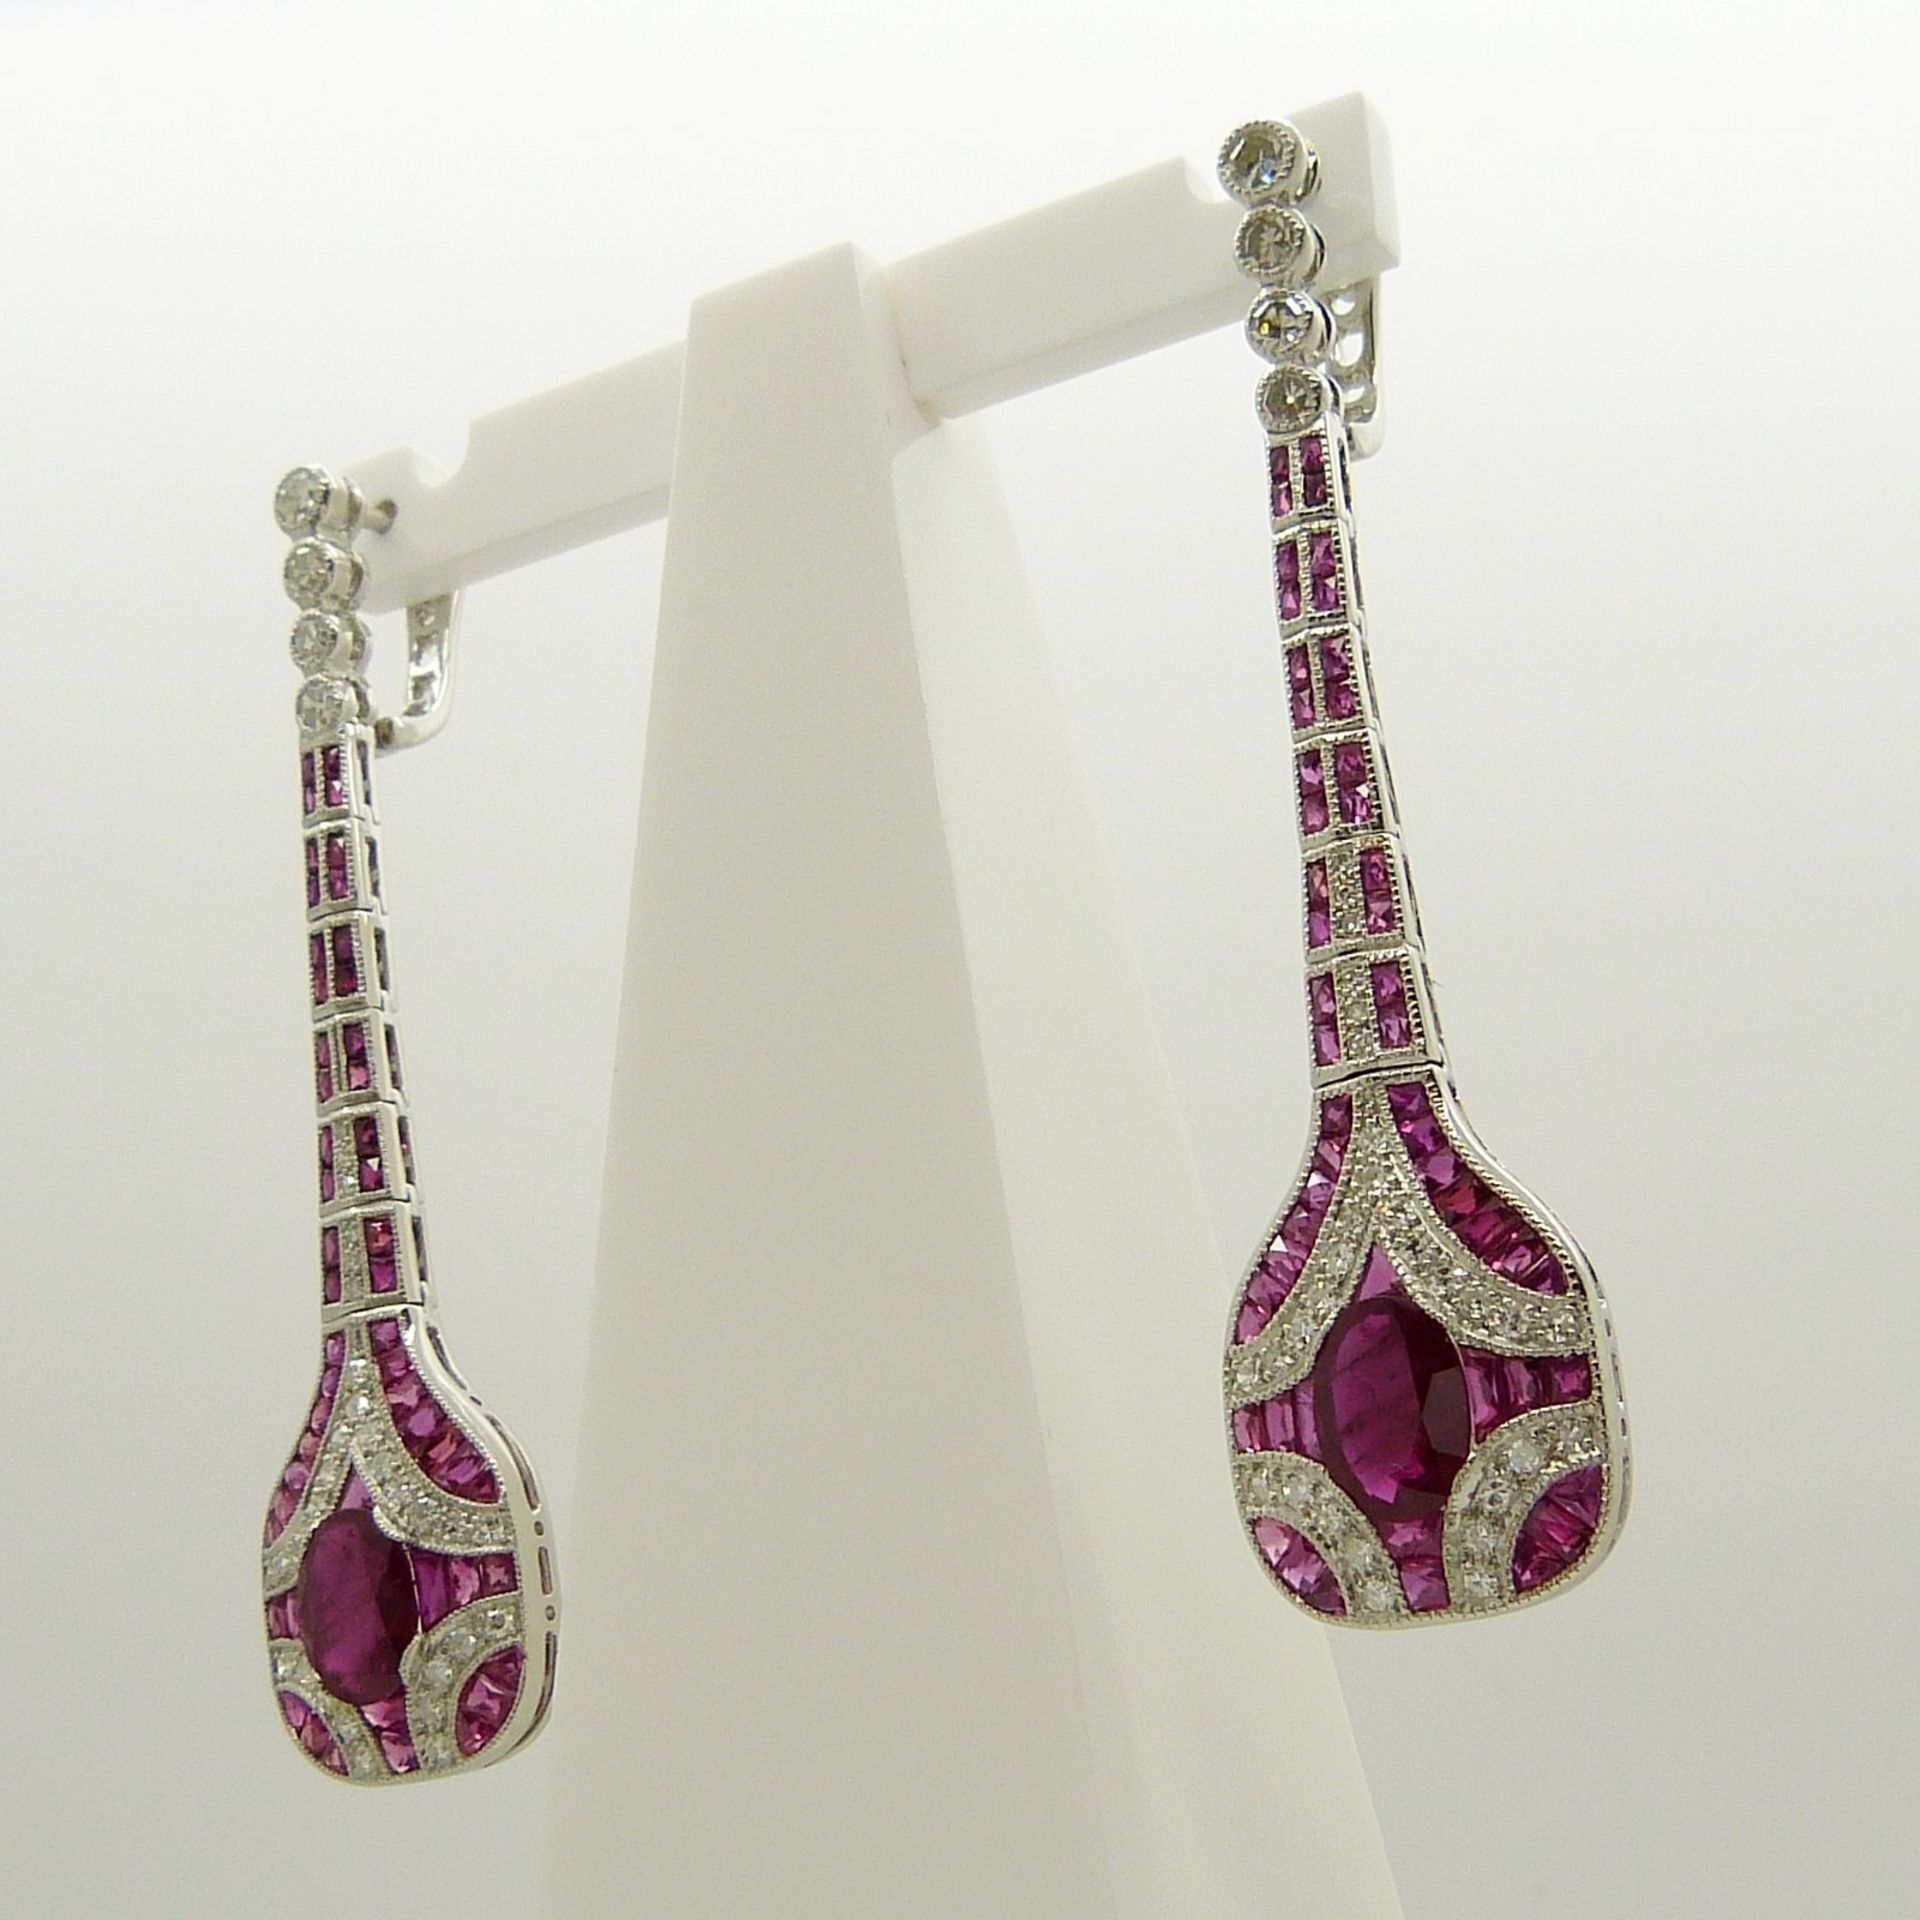 Long platinum Art Deco-style drop earrings set with rubies and diamonds - Image 7 of 9